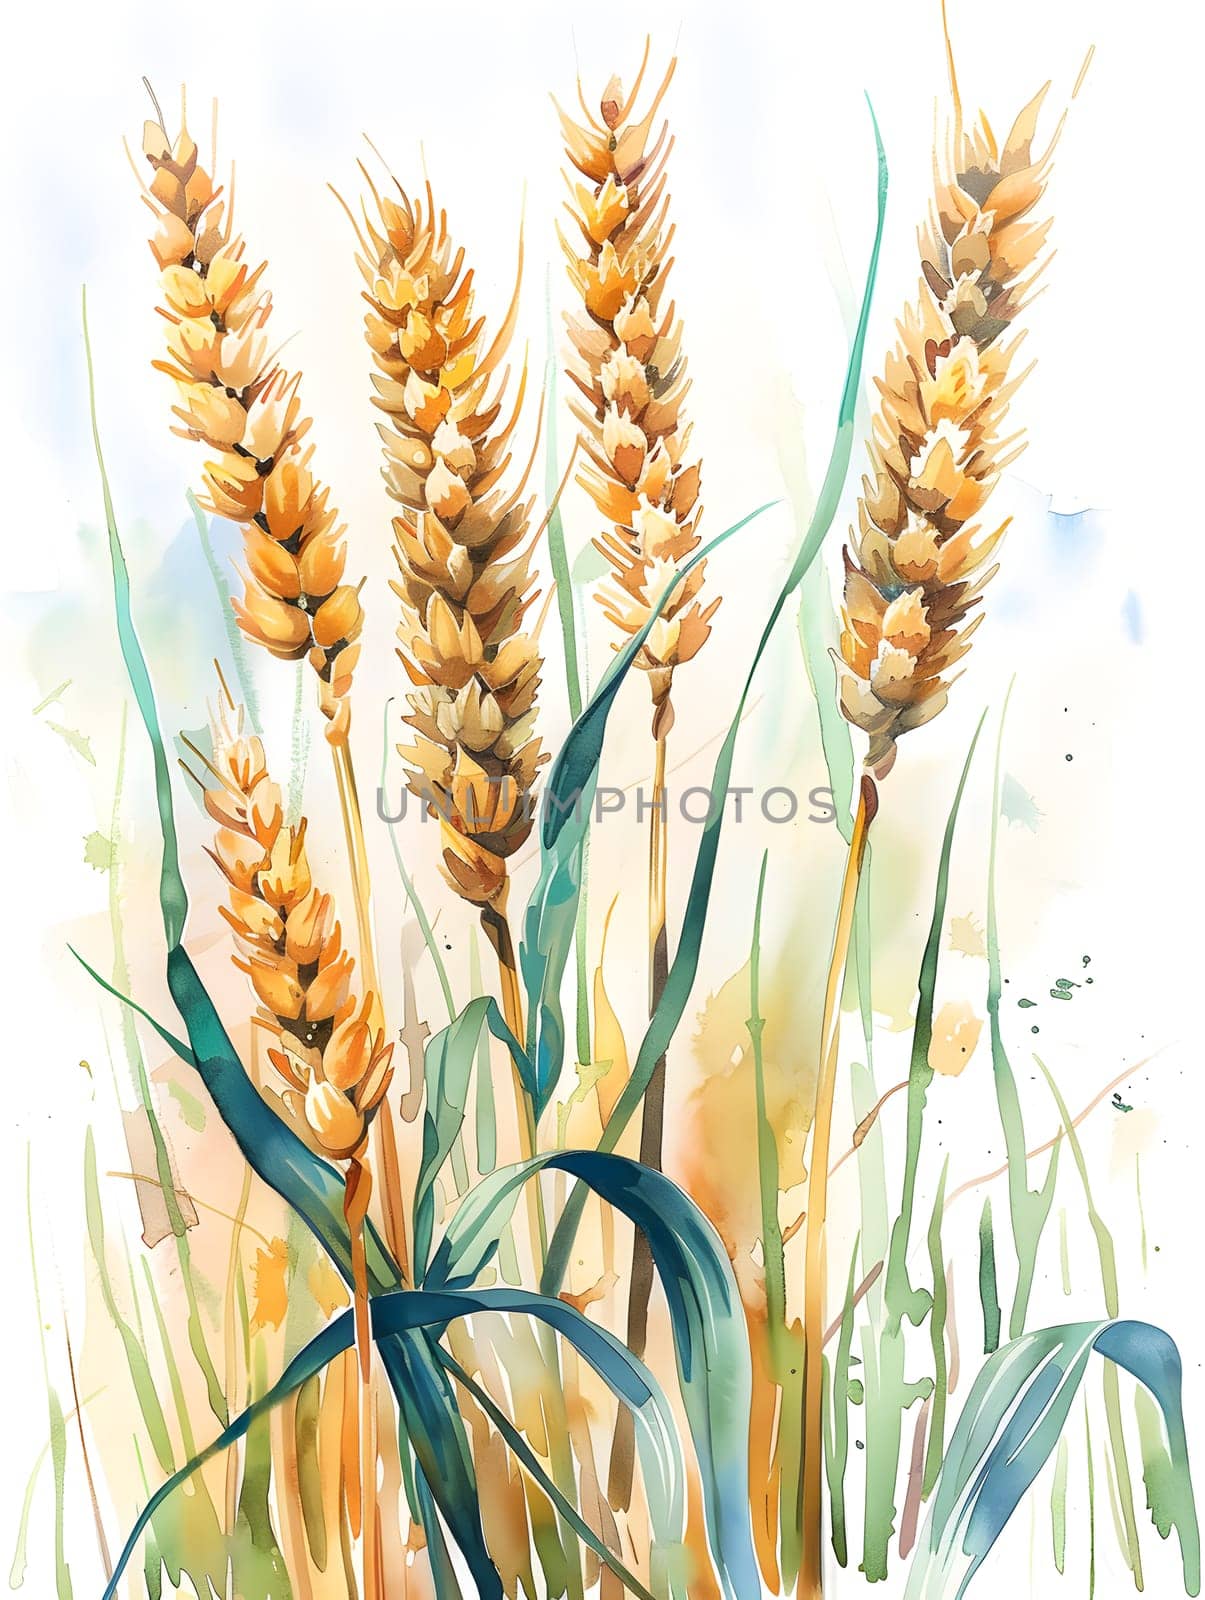 A watercolor painting capturing the beauty of wheat ears growing in a field, showcasing the intricate details of this flowering plant from the grass family